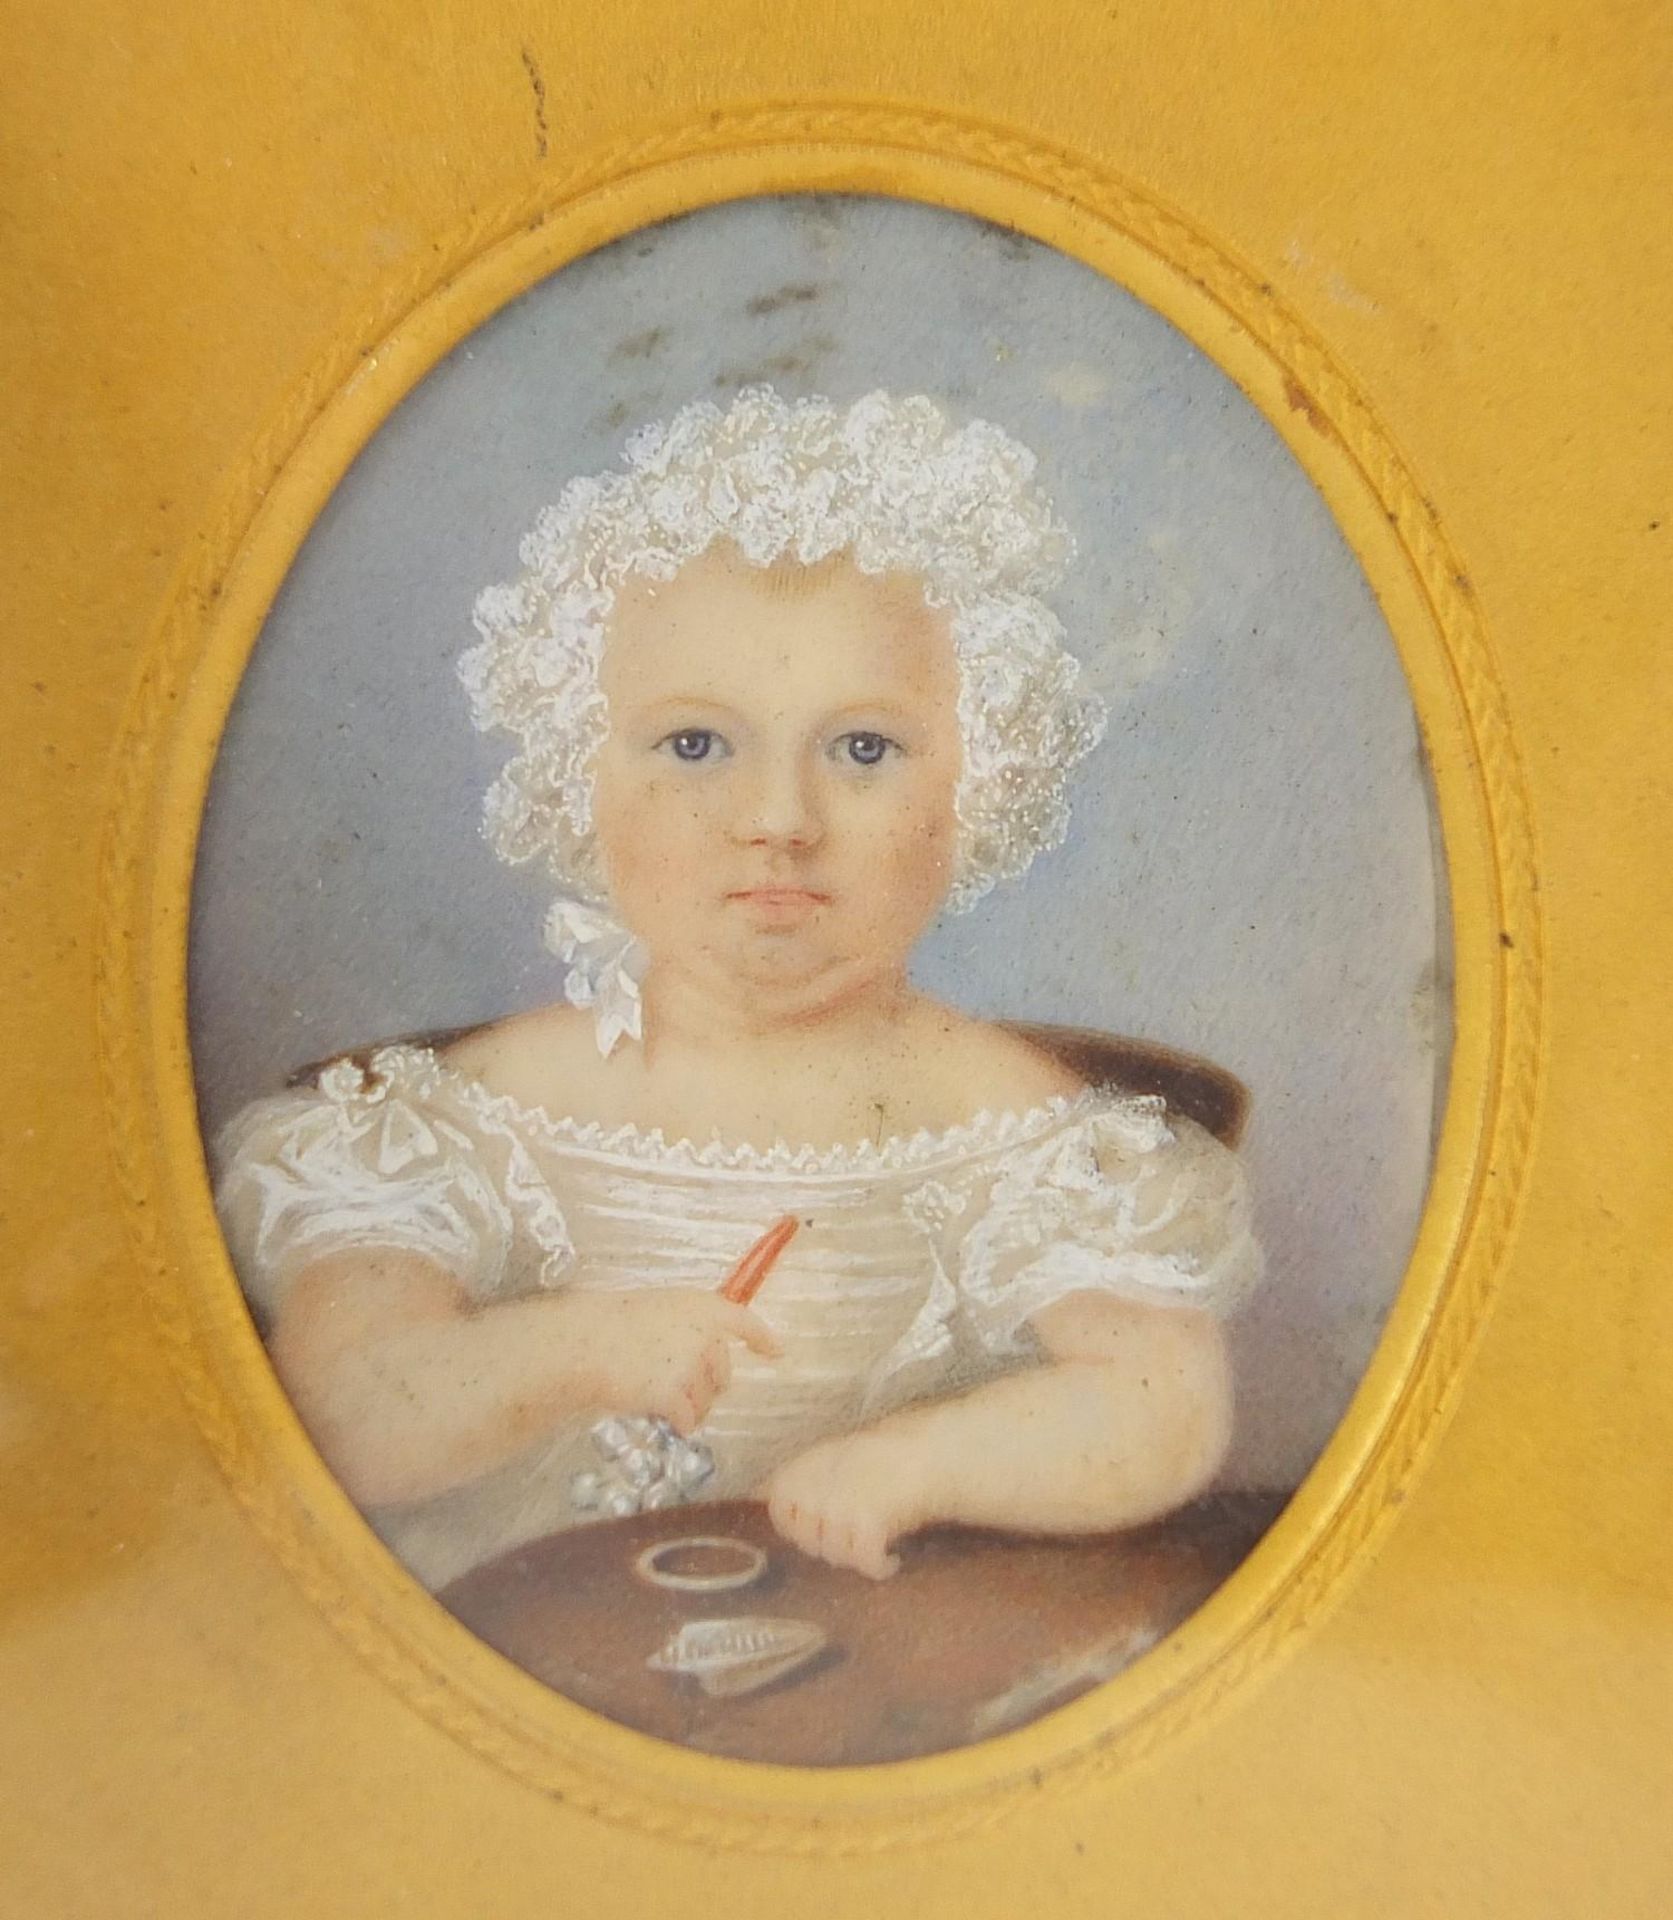 19th century oval hand painted portrait miniature of a young girl holding a rattle, housed in a - Image 2 of 4